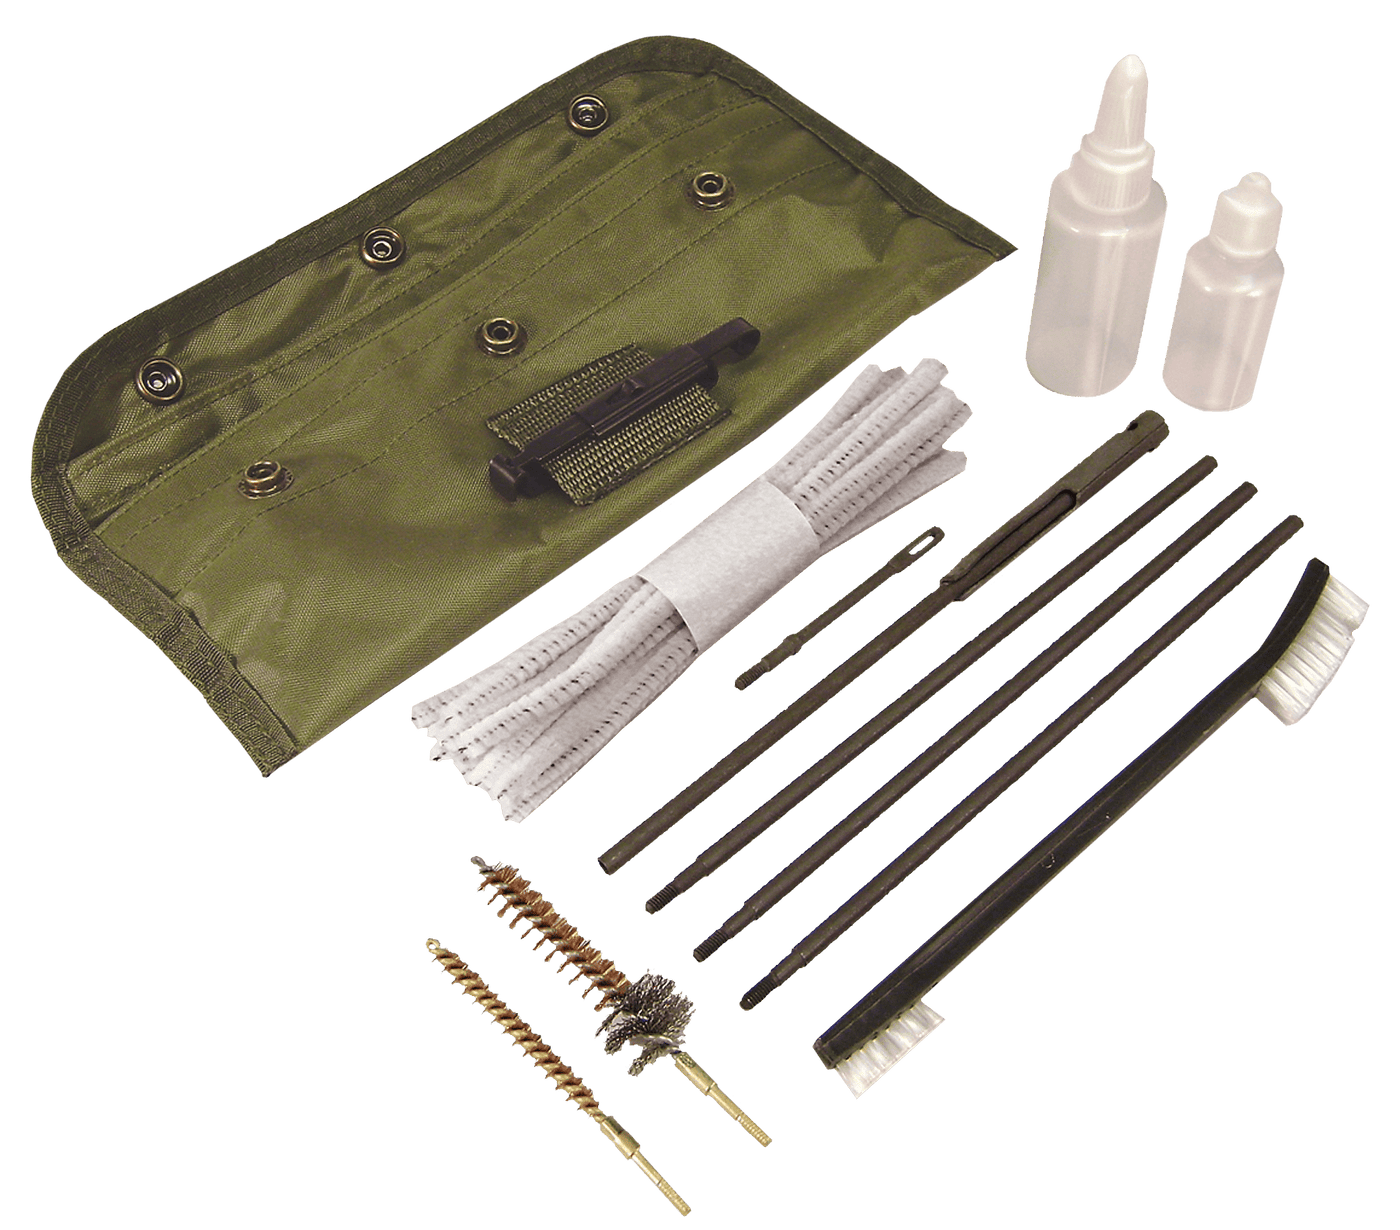 PSP Products Psp Cleaning Kit Ar15/m16 - Gi Field Od Green Pouch Cleaning Kits